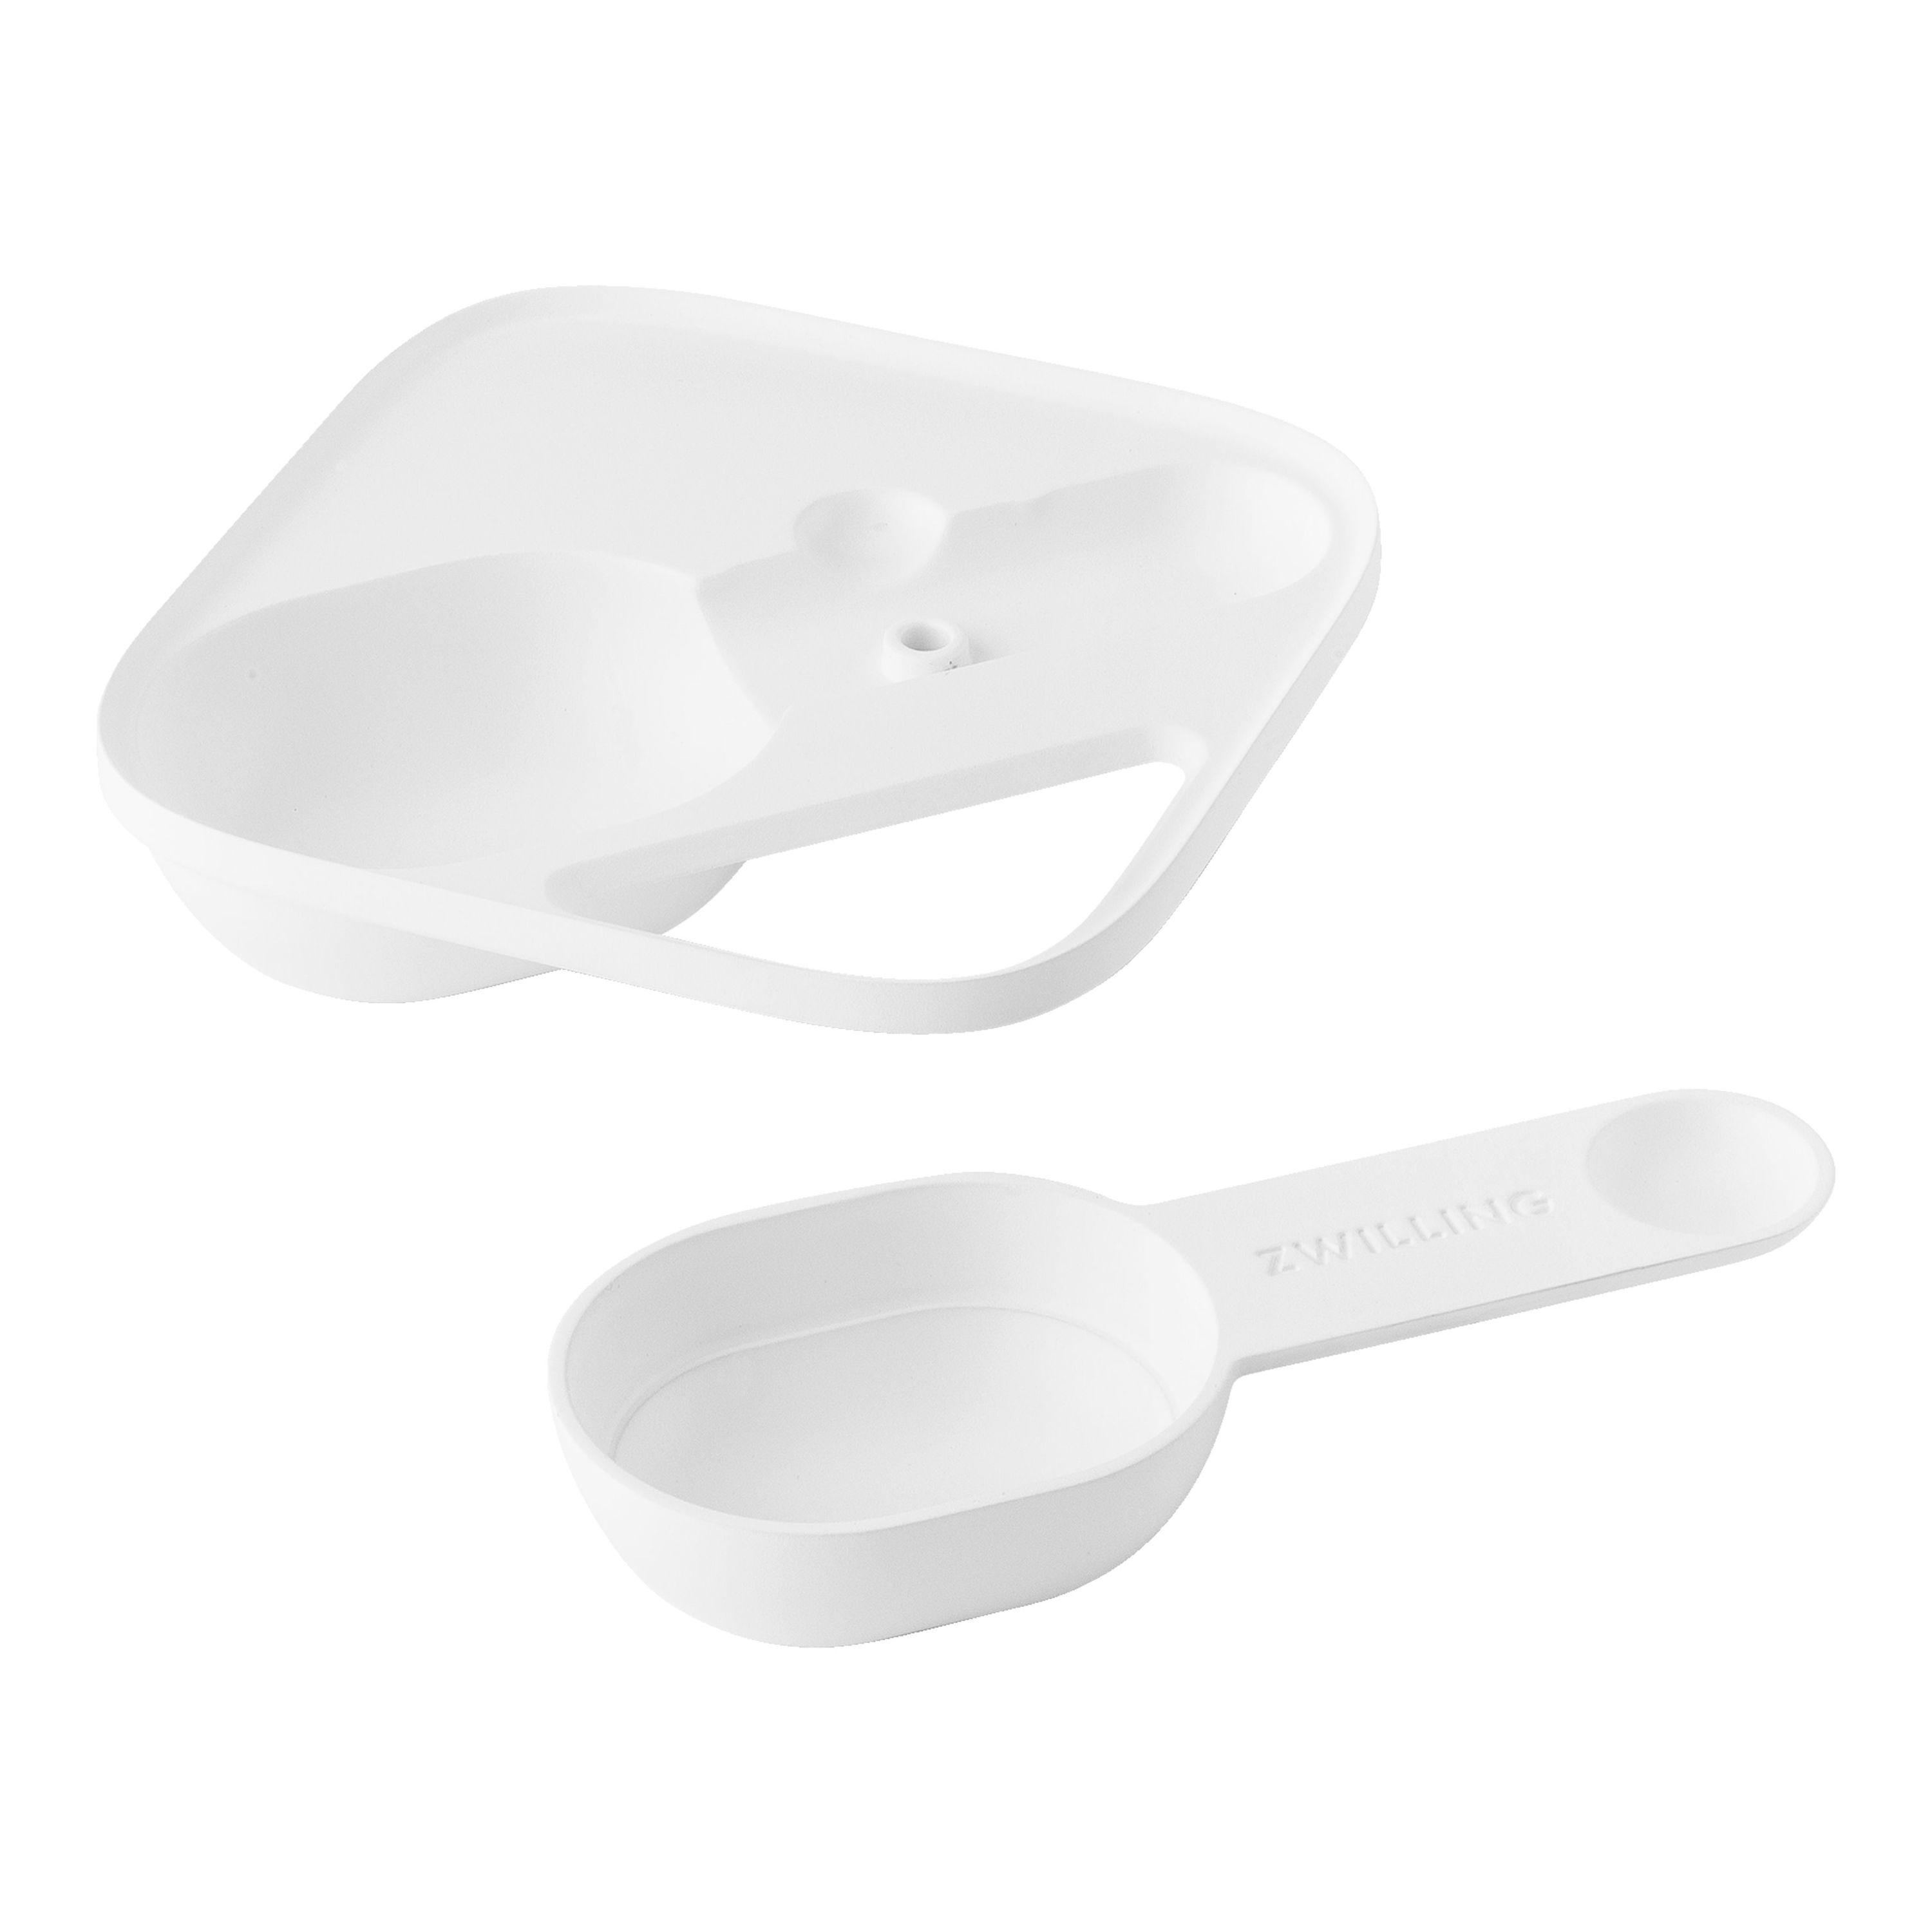 Pacojet ChefTools on X: Introducing the Bequeen #Quenelle Spoon Designed  by a New York pastry chef for chefs worldwide Bequeen spoons are designed  to give you a perfect #quenelle shape, pointed at